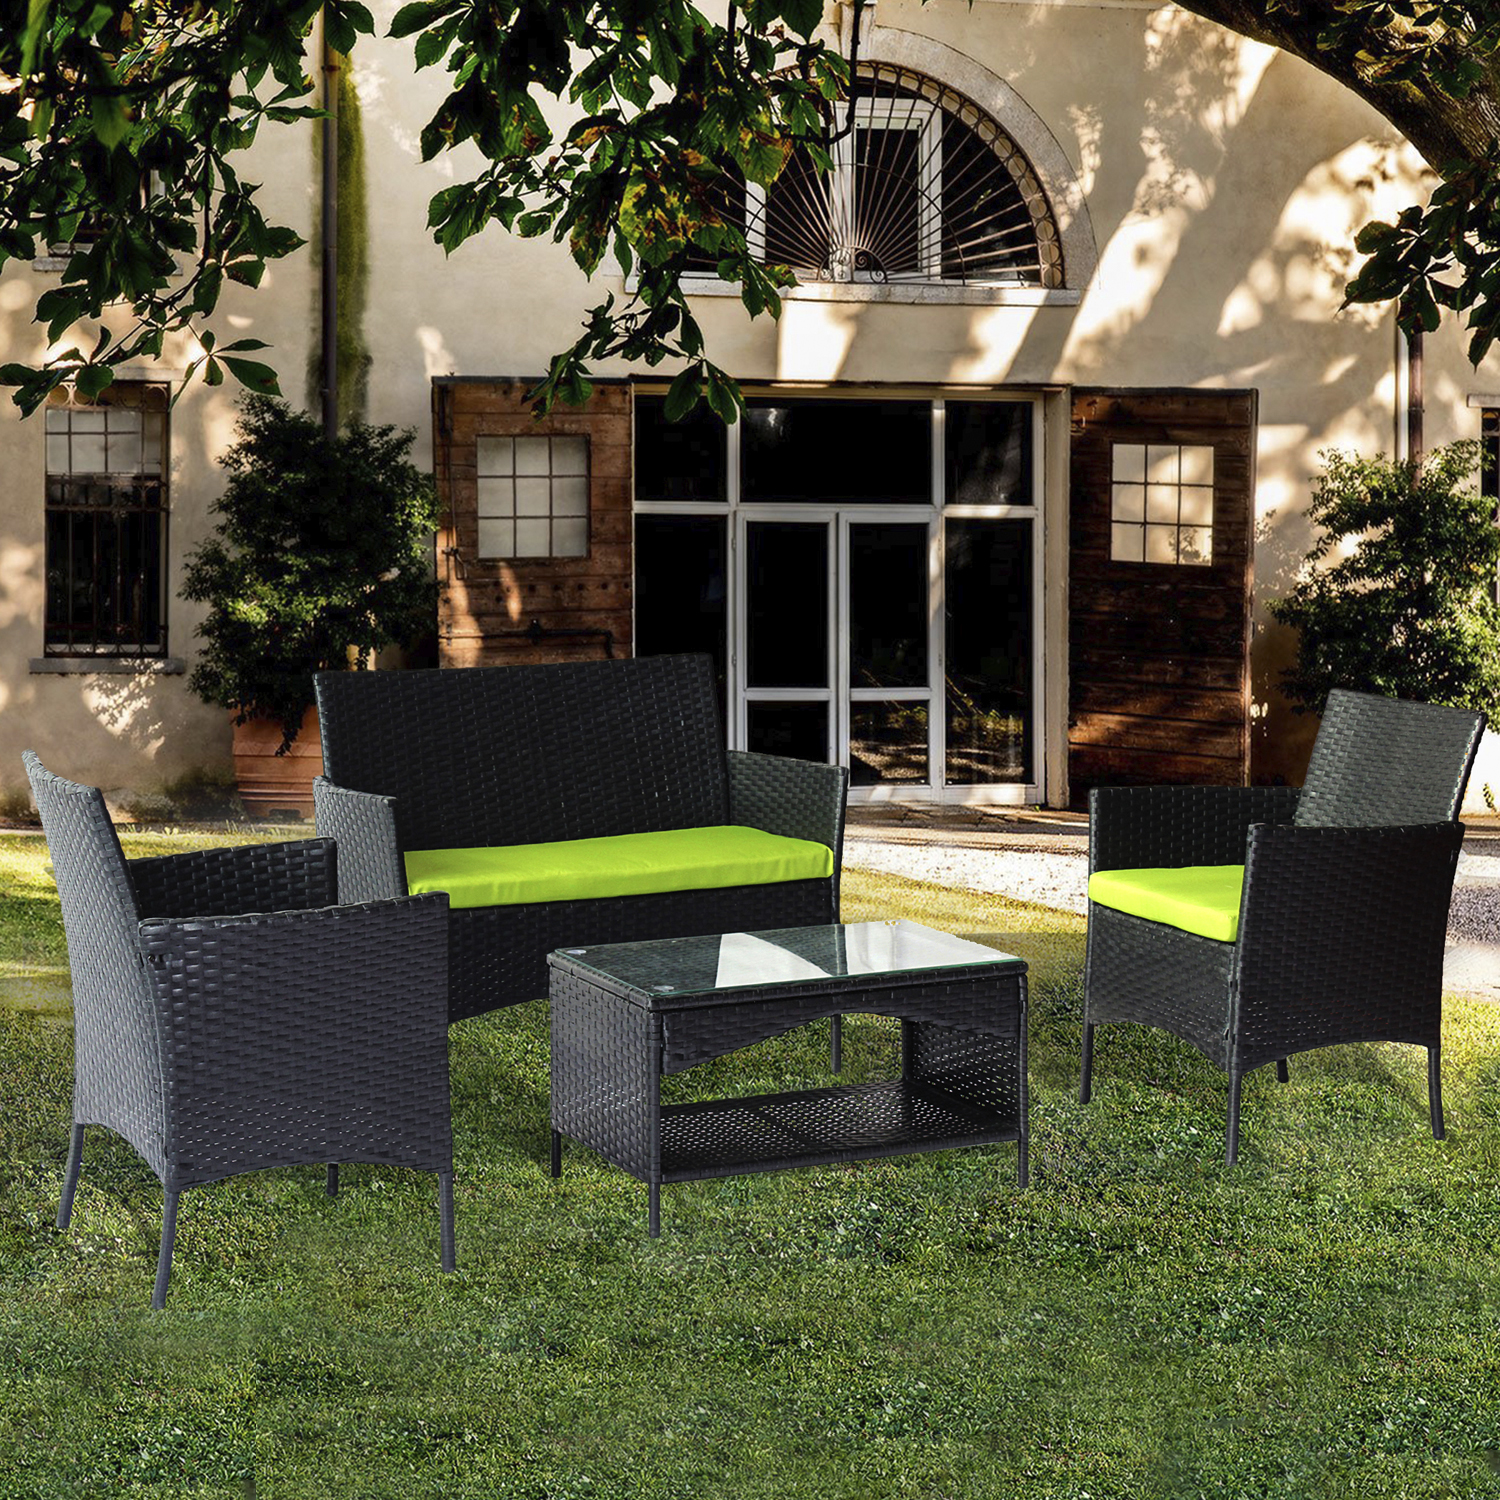 uhomepro 4 Piece Rattan Patio Furniture Set, Outdoor Wicker Conversation Dining Bar Sets with 2pcs Arm Chairs 1pc Love Seat, Coffee Table, Green Cushions for Backyard Poolside Garden - image 3 of 8